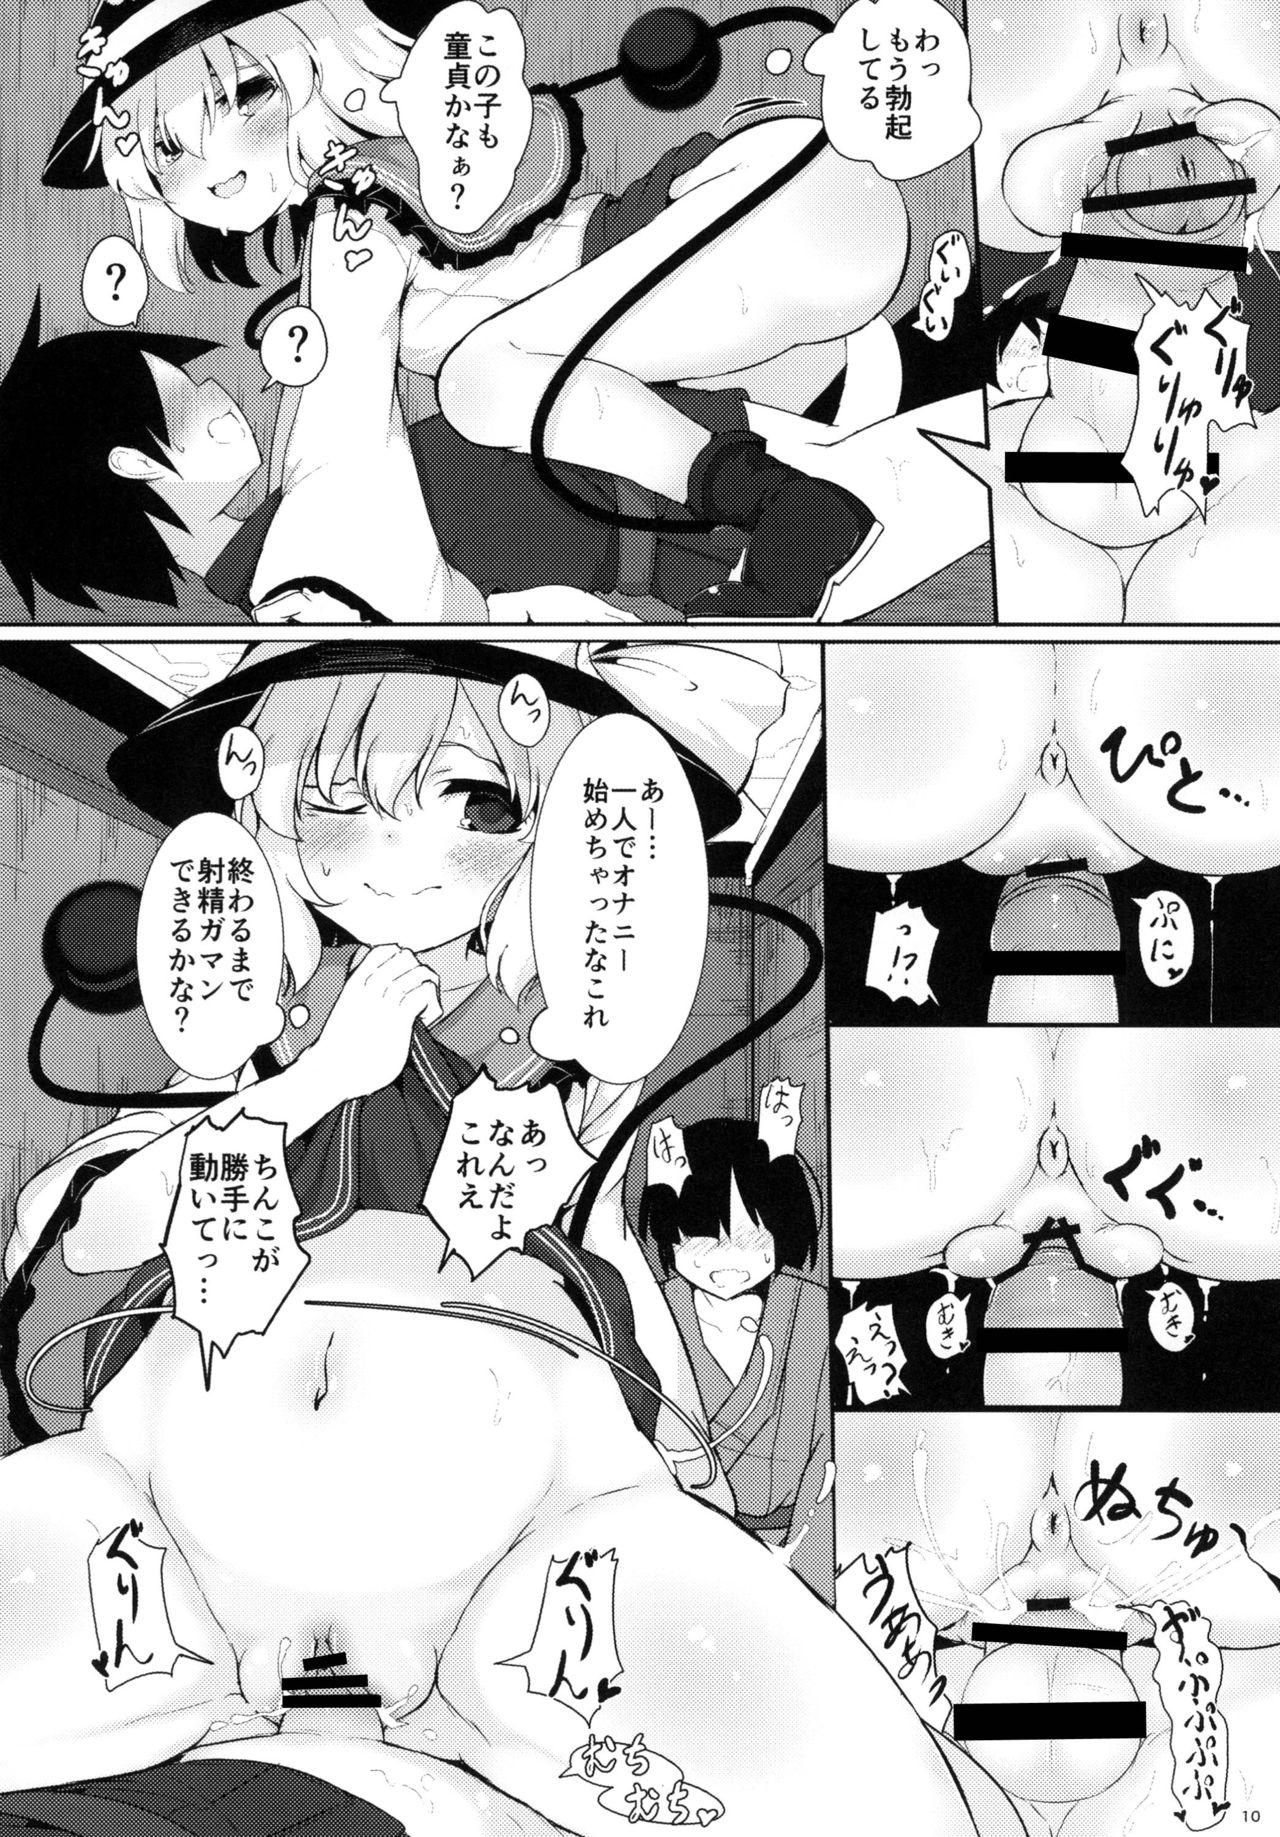 Porn Blow Jobs Imaginary Friends - Touhou project Pussy To Mouth - Page 10